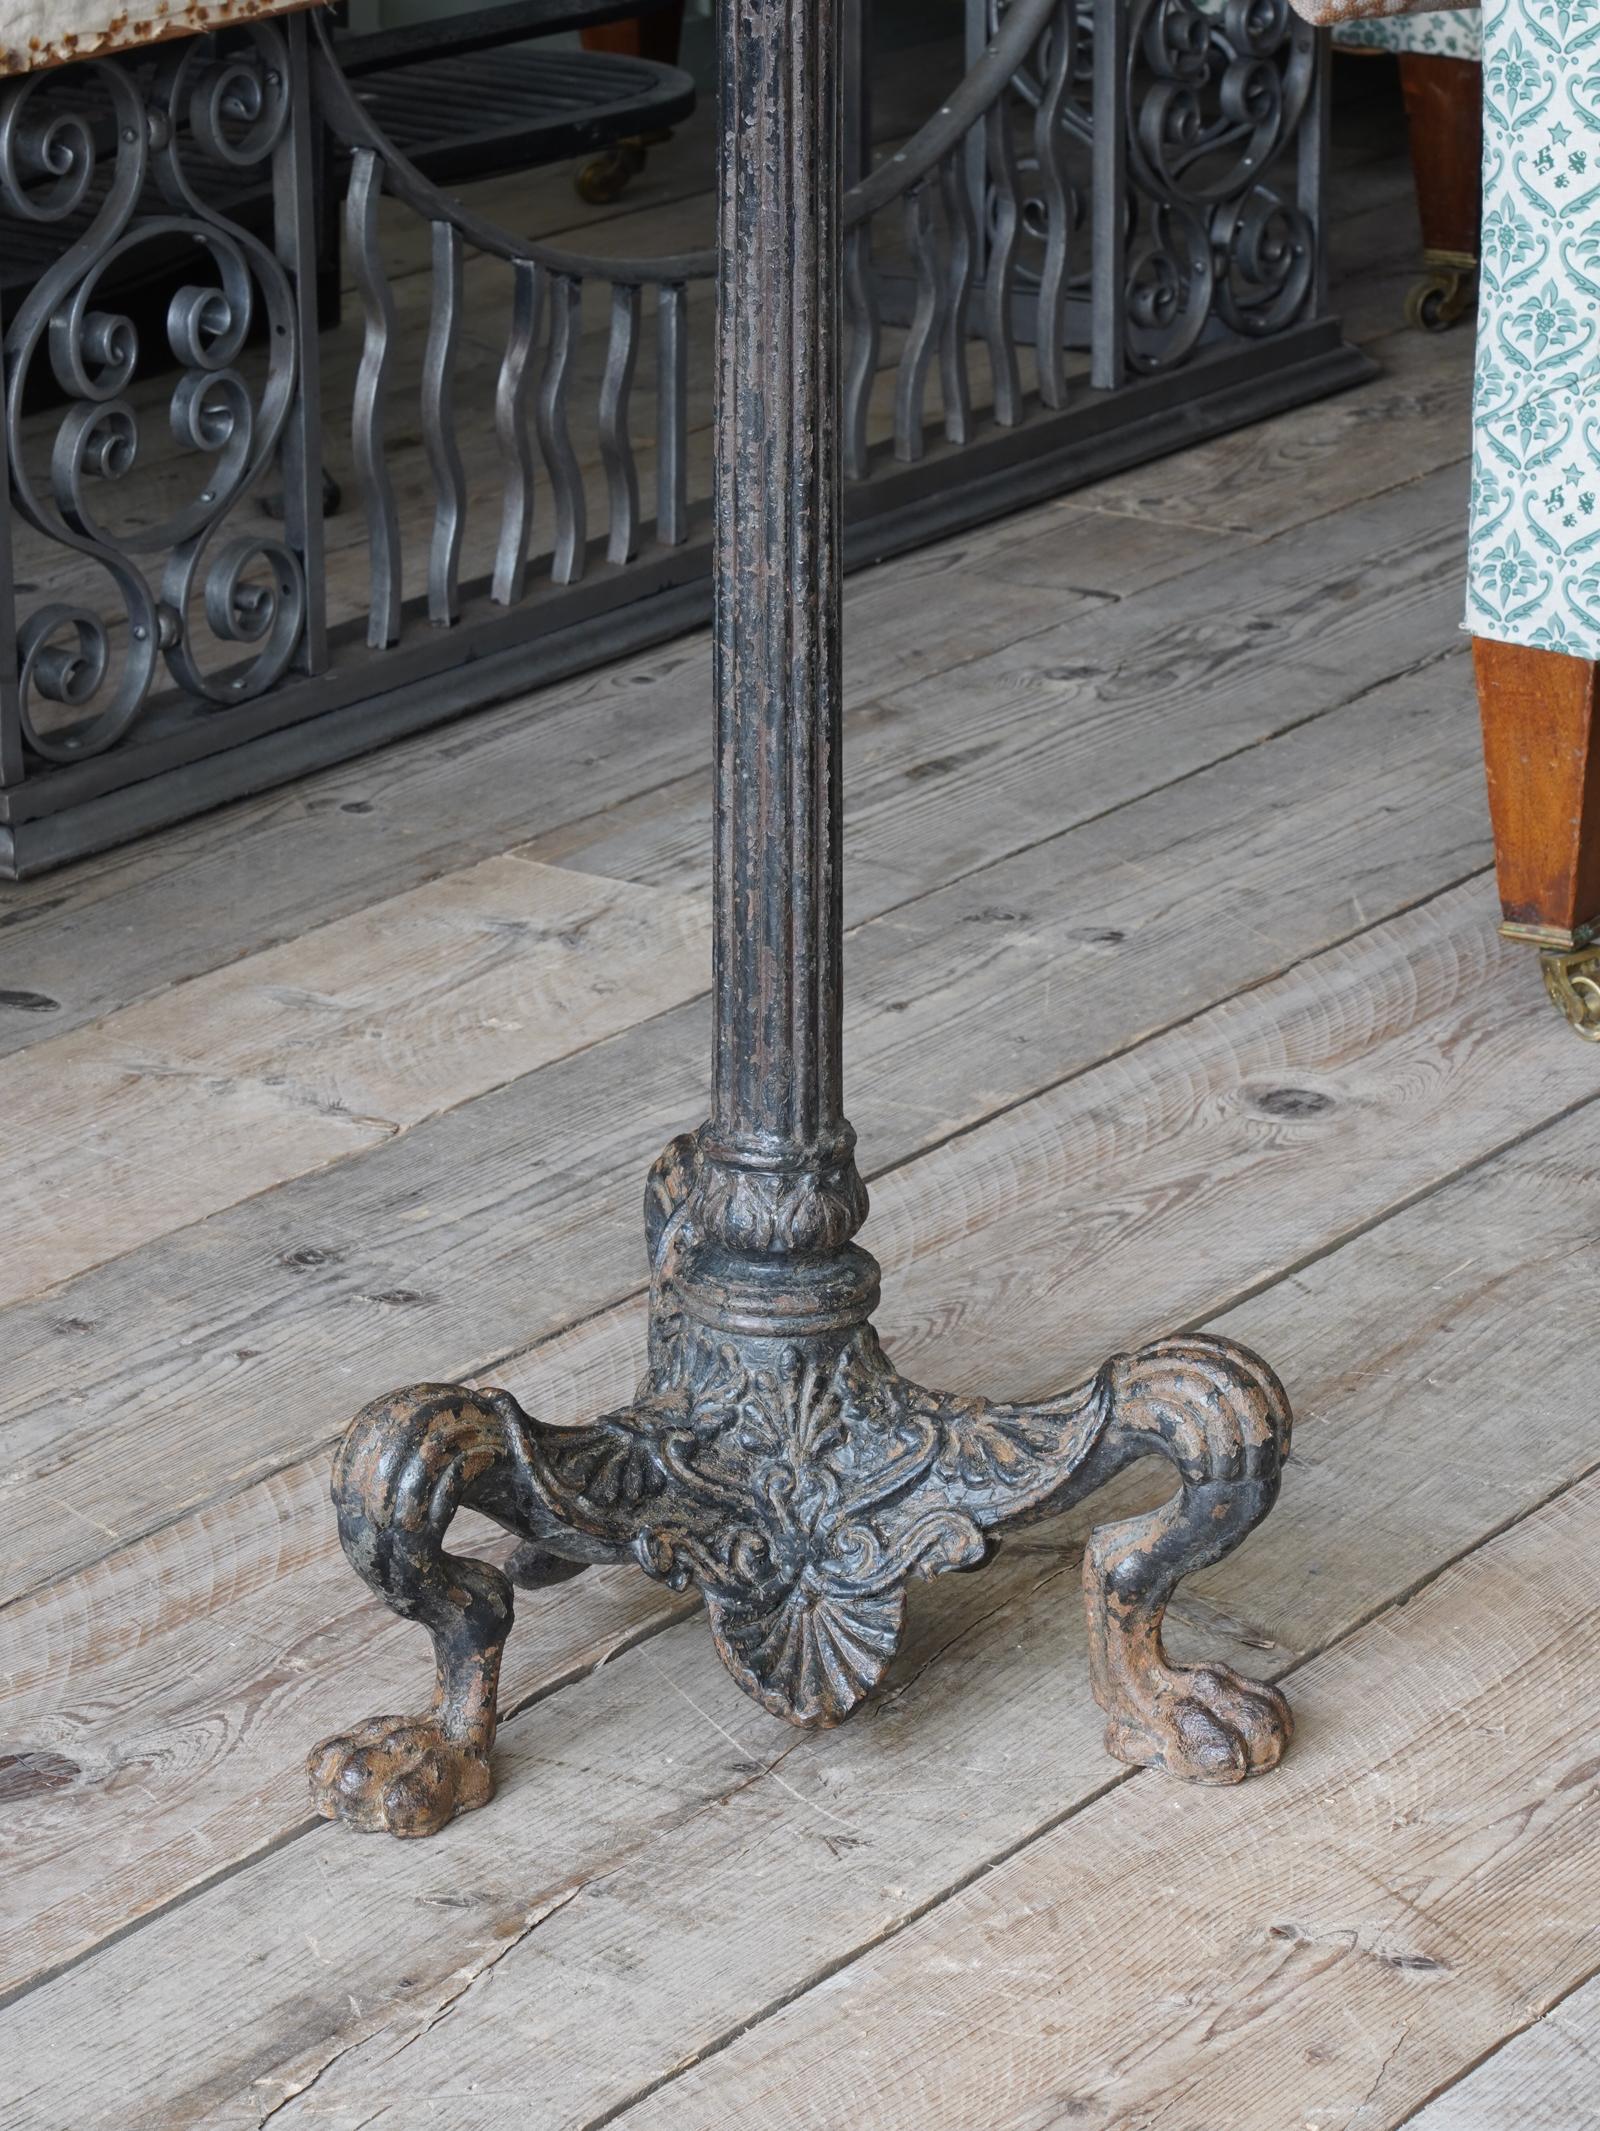 Raised on animalistic leg with lions paw feet, anthemion decorations to the skirt, reeded tapering column terminating in acanthus with bowl above.

Originally an oil lamp with glass uplighter would have topped this piece, but the space left is